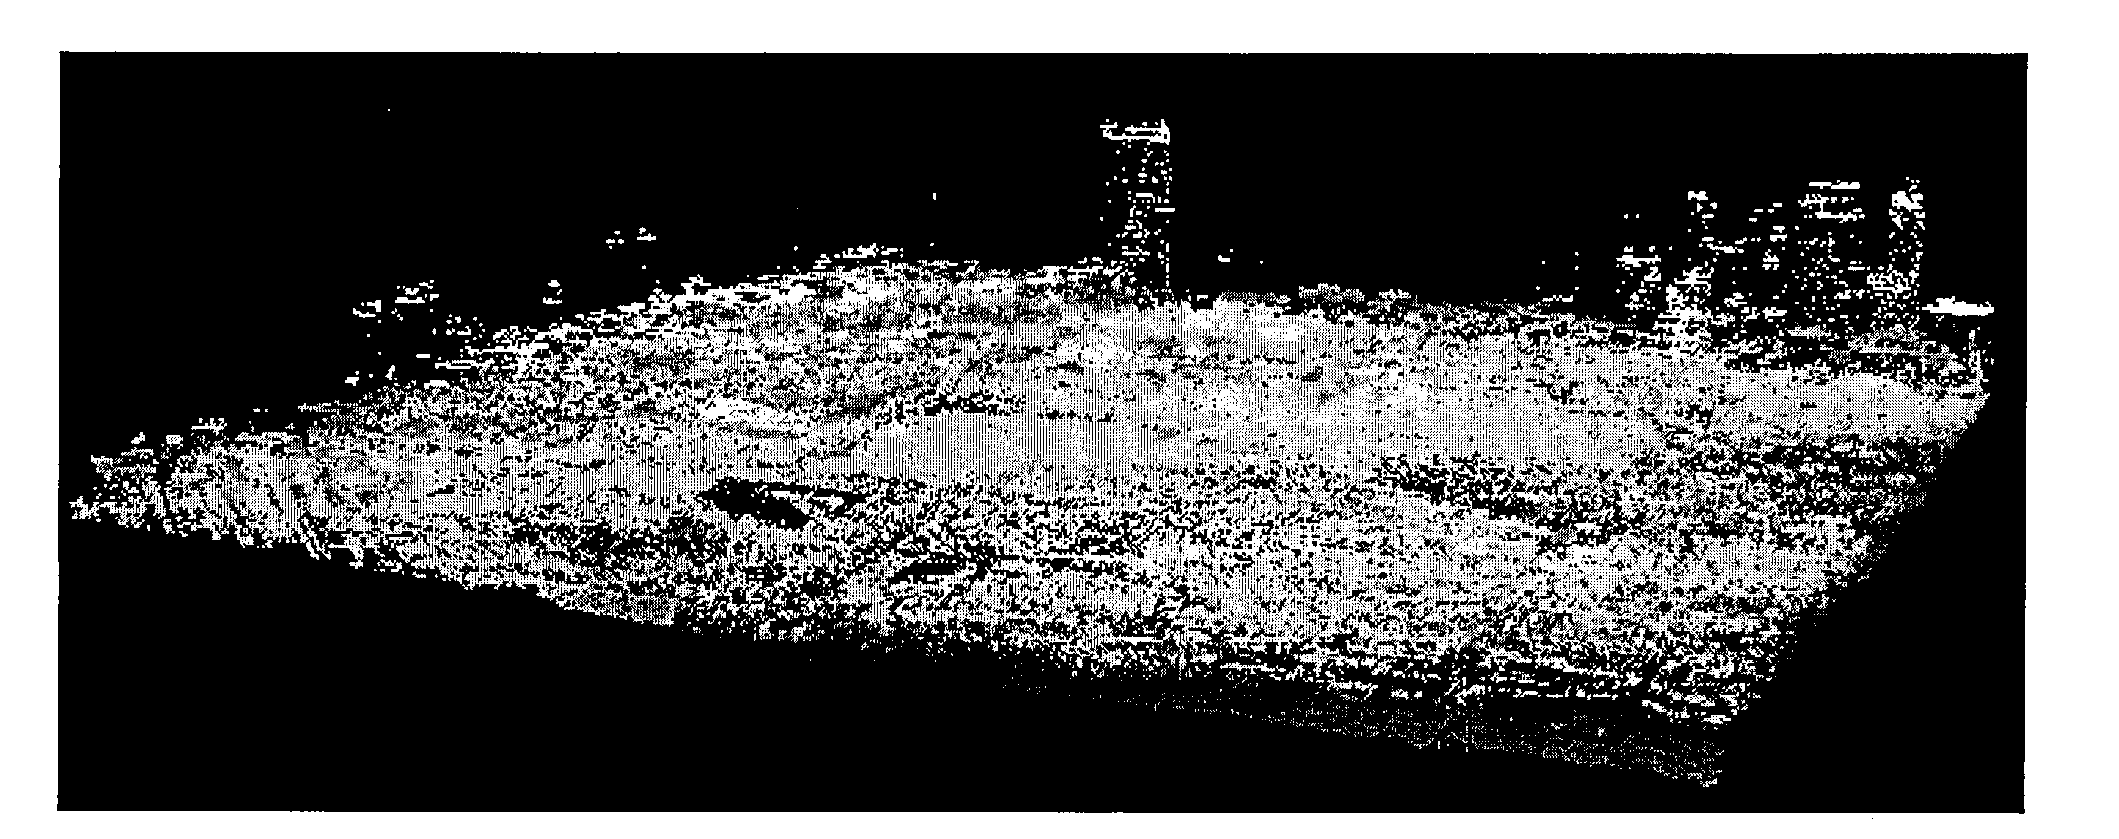 Method for quickly extracting building three-dimensional outline information in onboard LiDAR (light detection and ranging) data